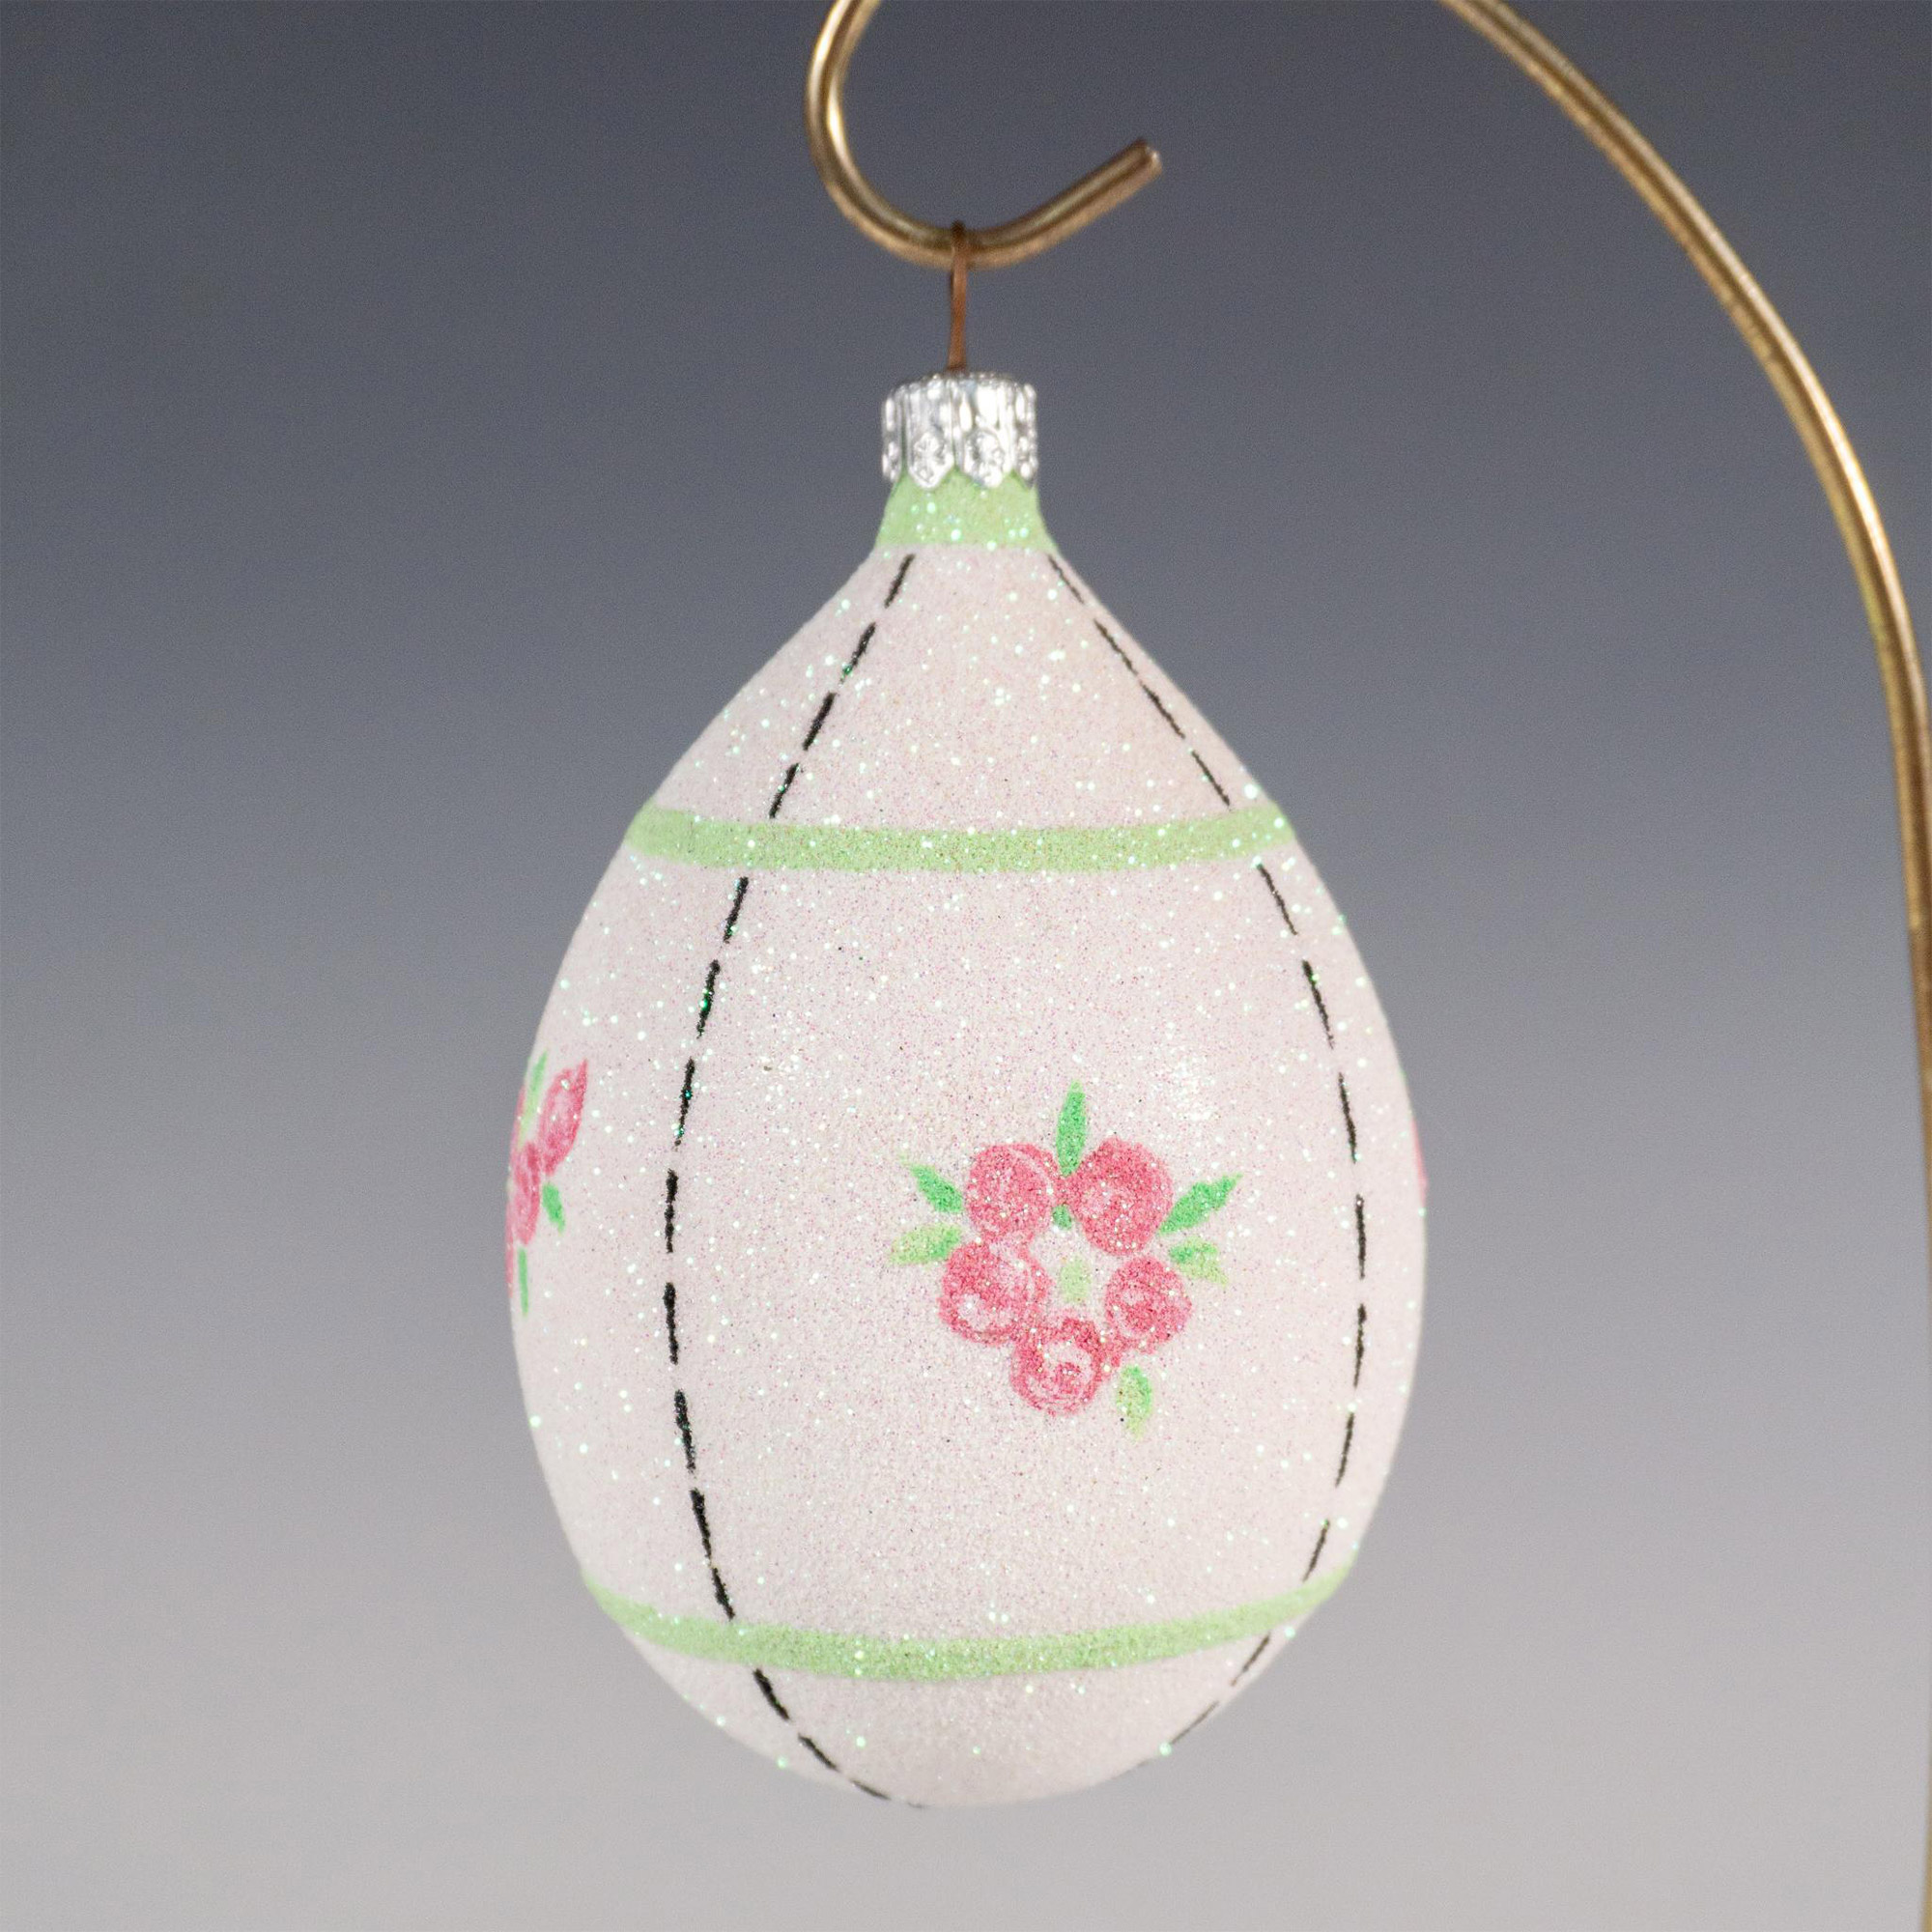 Patricia Breen Christmas Ornament, Easter Egg Roses - Image 2 of 2